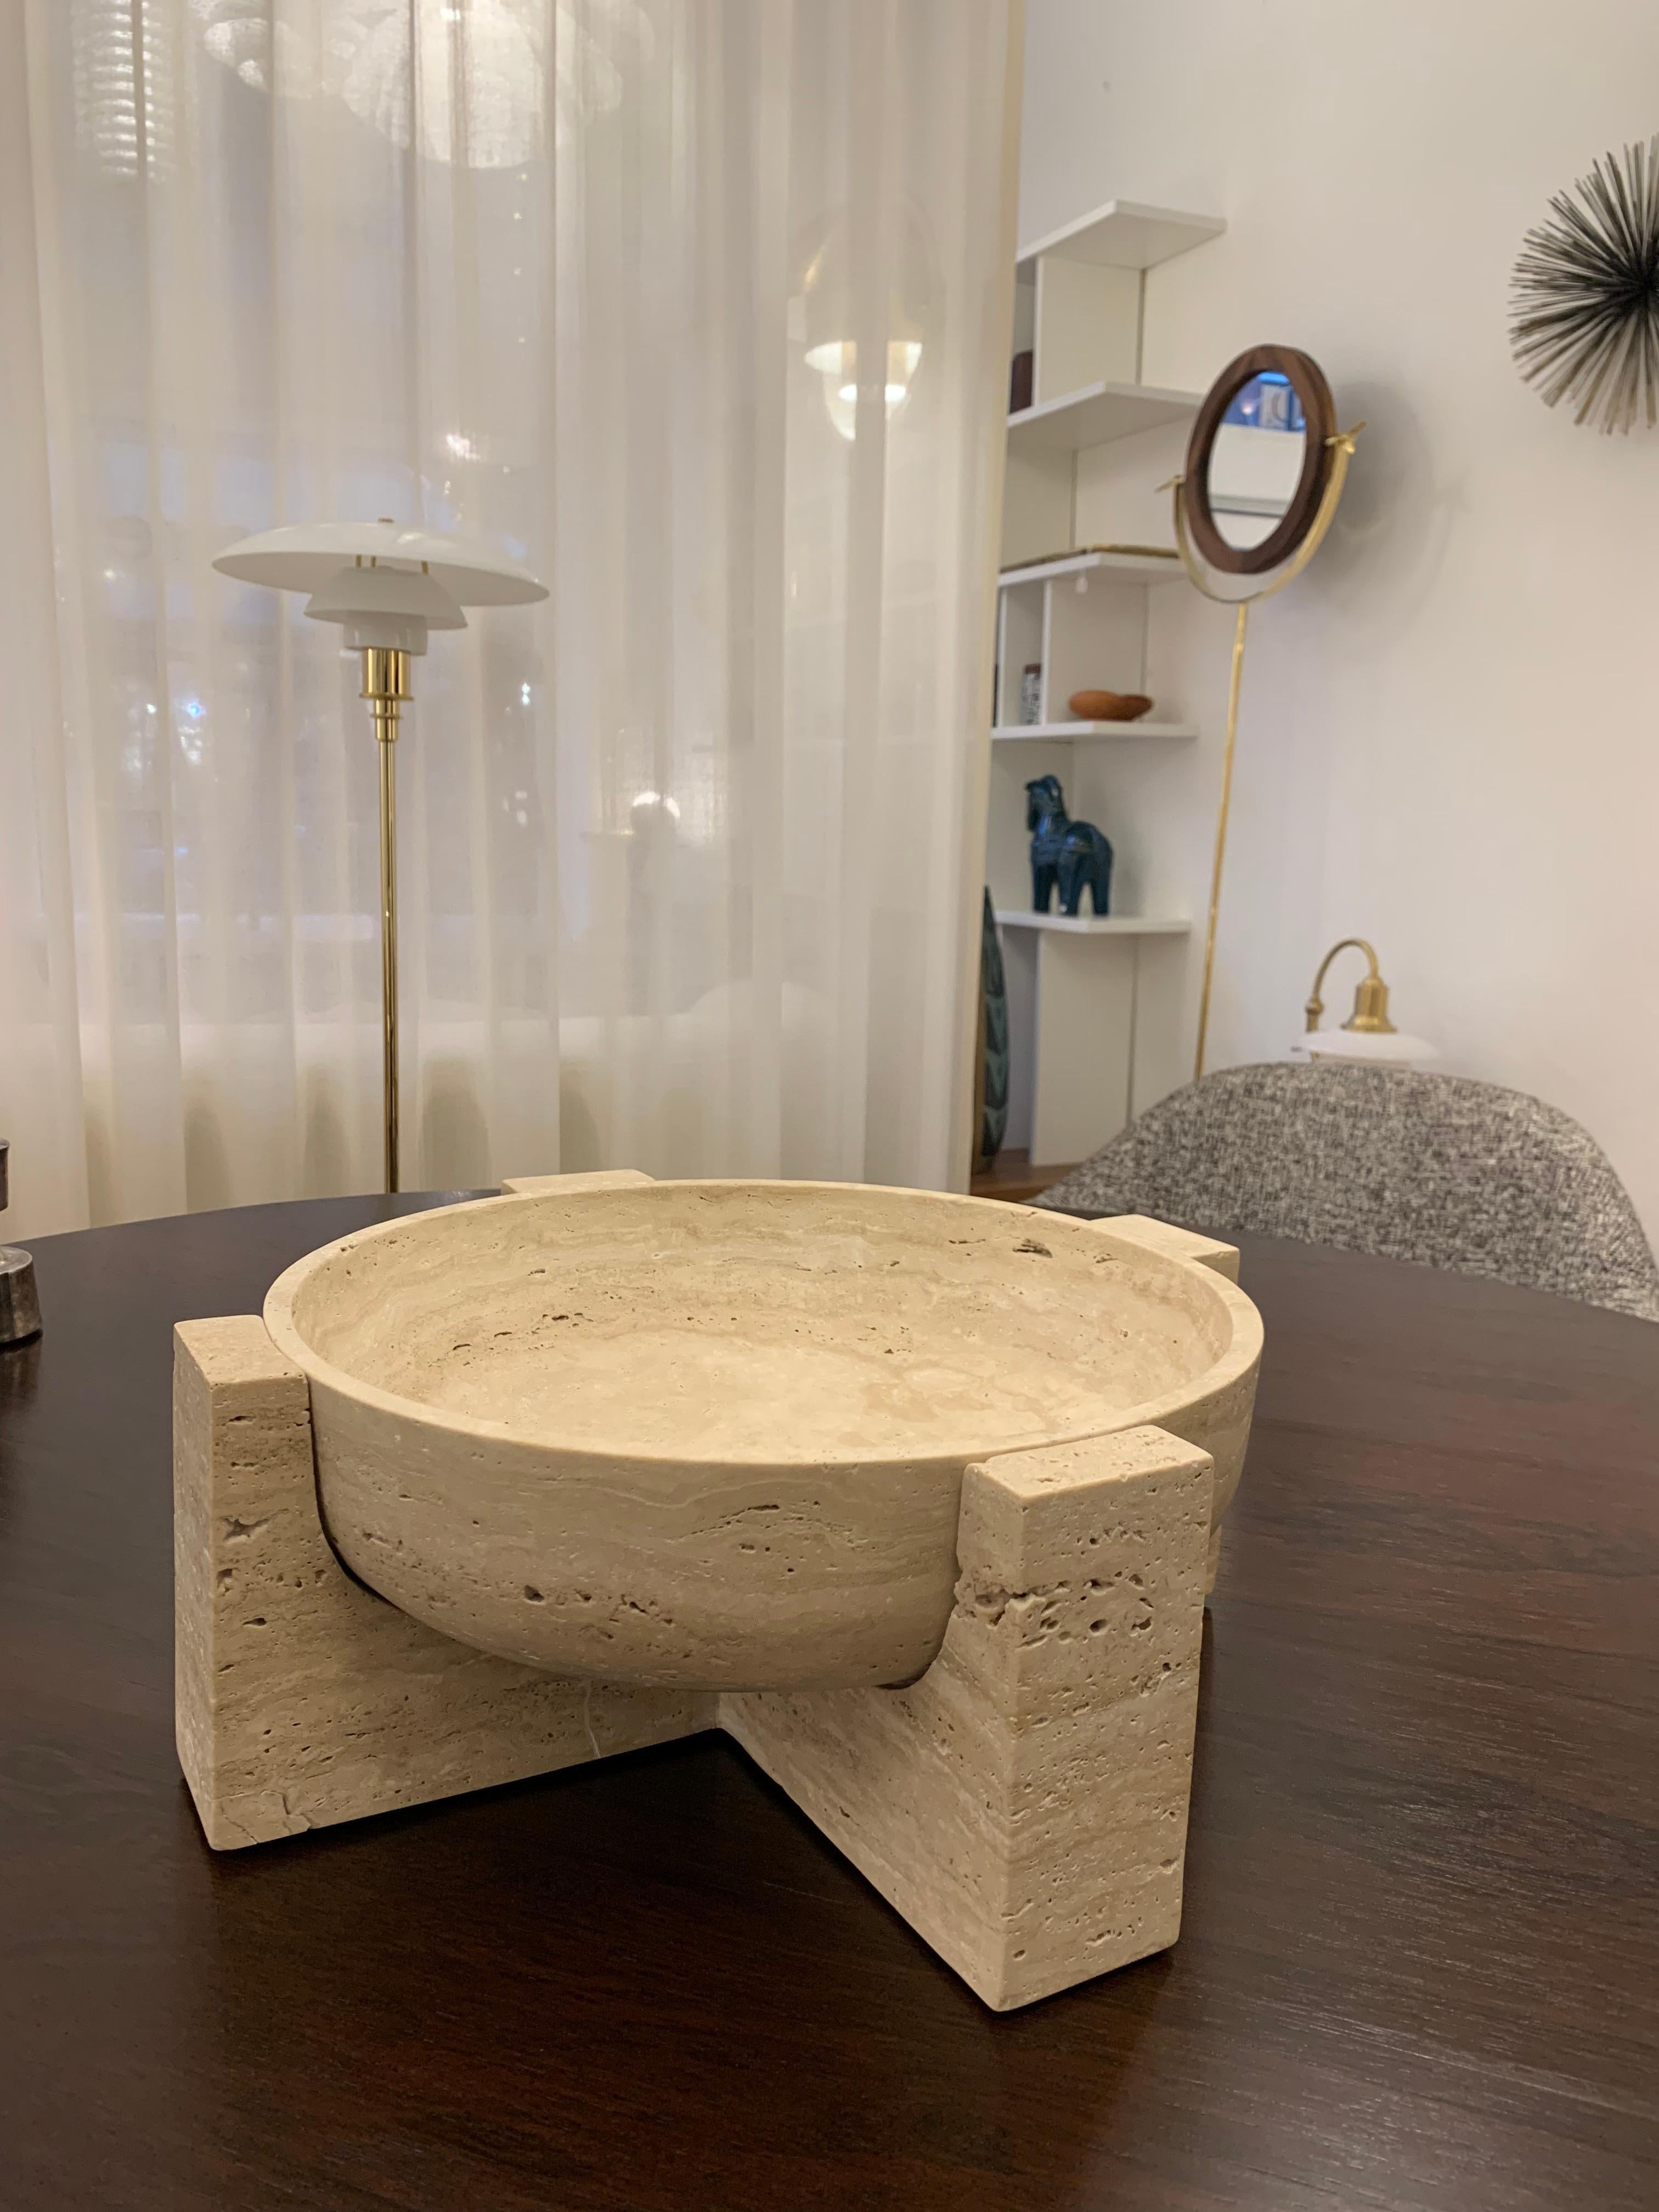 Large Romain Travertine 'Key' Fruit Bowl by Arno Declercq for Collection Particulière, France. 

Collection Particulière is a Parisian company, known for its unique artisan hand-made objects. Each object is unique and made from high-quality